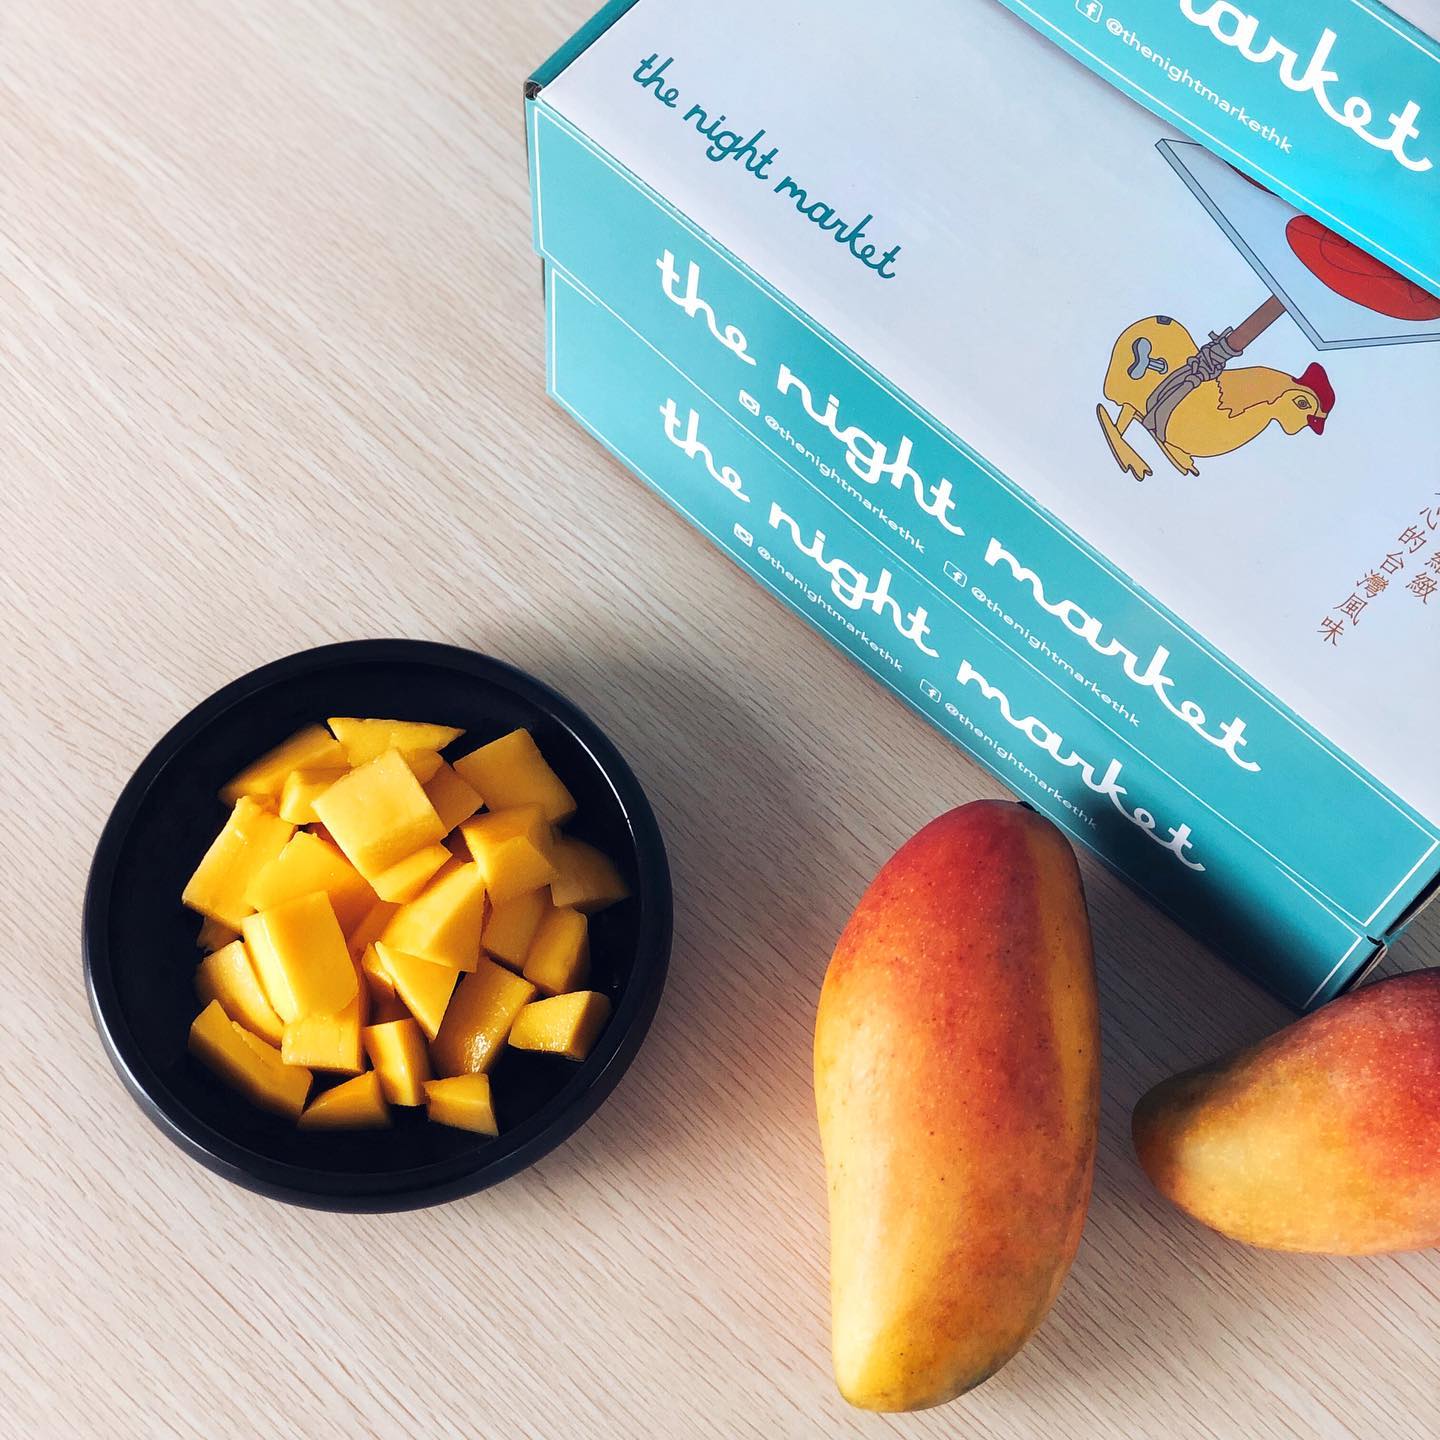 Our seasonal Taiwanese Xishi Mango is back😍! Come by The Night Market and try this uniquely creamy and sweet treat